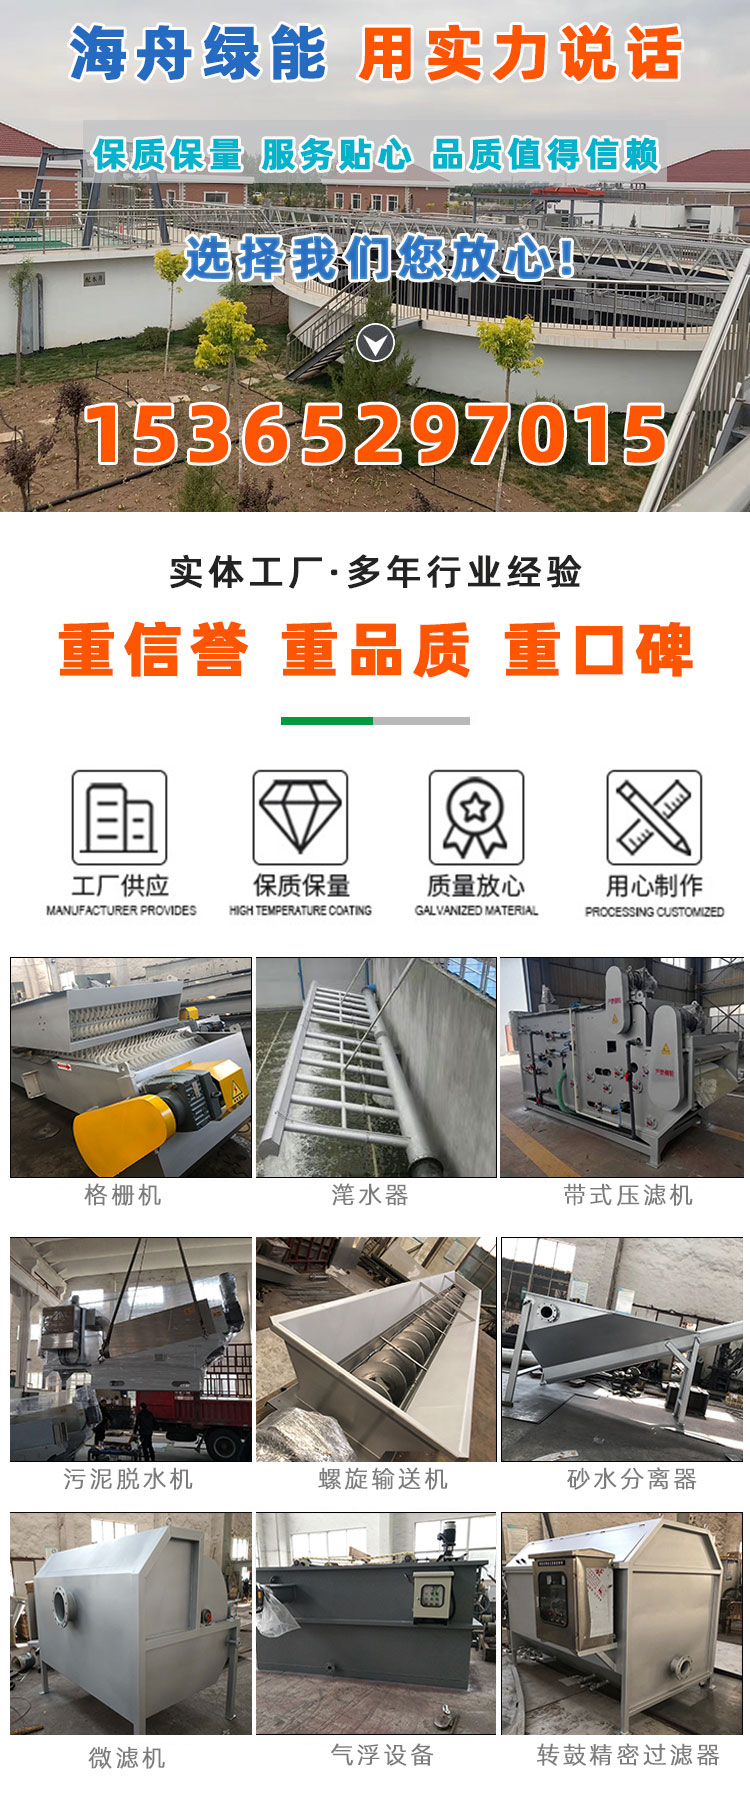 Stainless steel sewage treatment equipment, scraper suction mud mixer, industrial wastewater treatment, scraper mud equipment, order customization, Haizhou Green Energy Factory customization